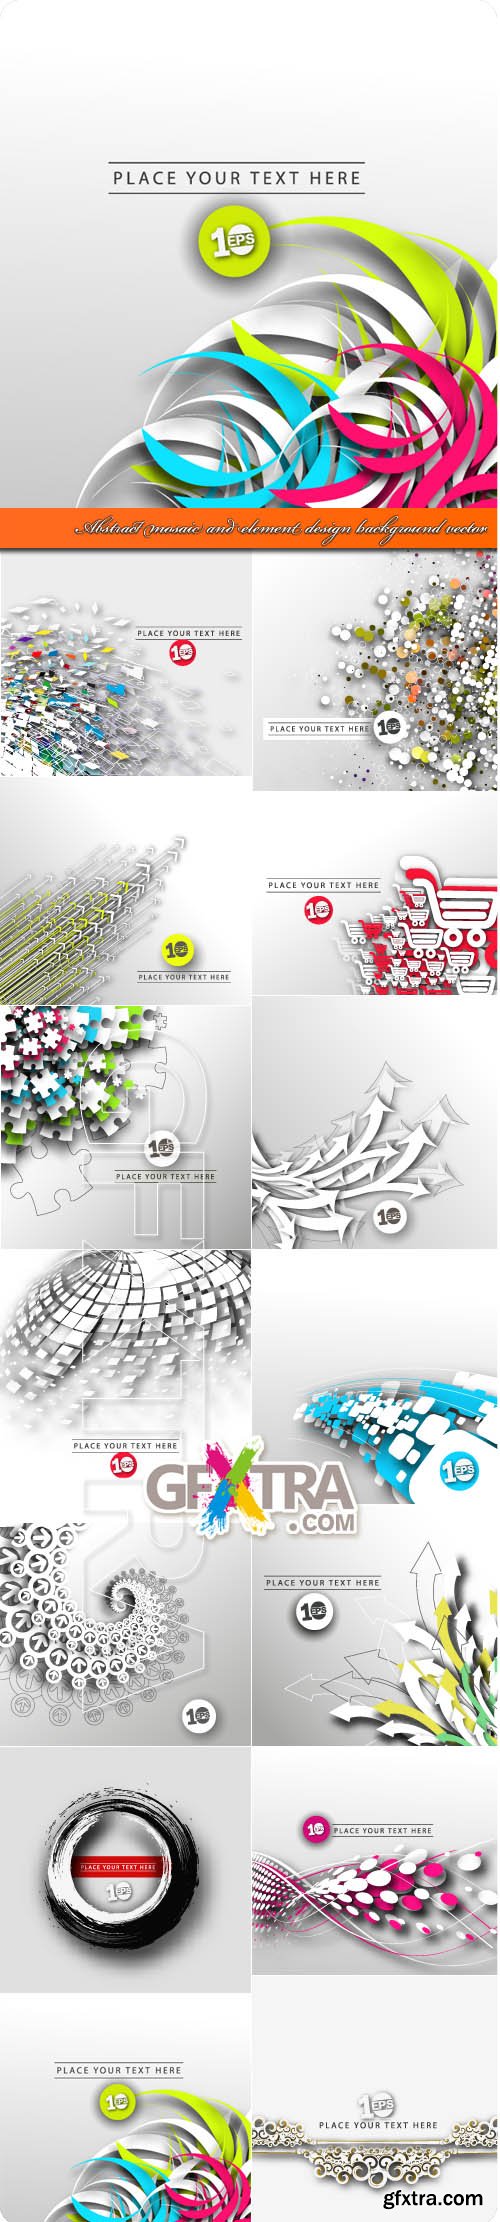 Abstract mosaic and element design background vector